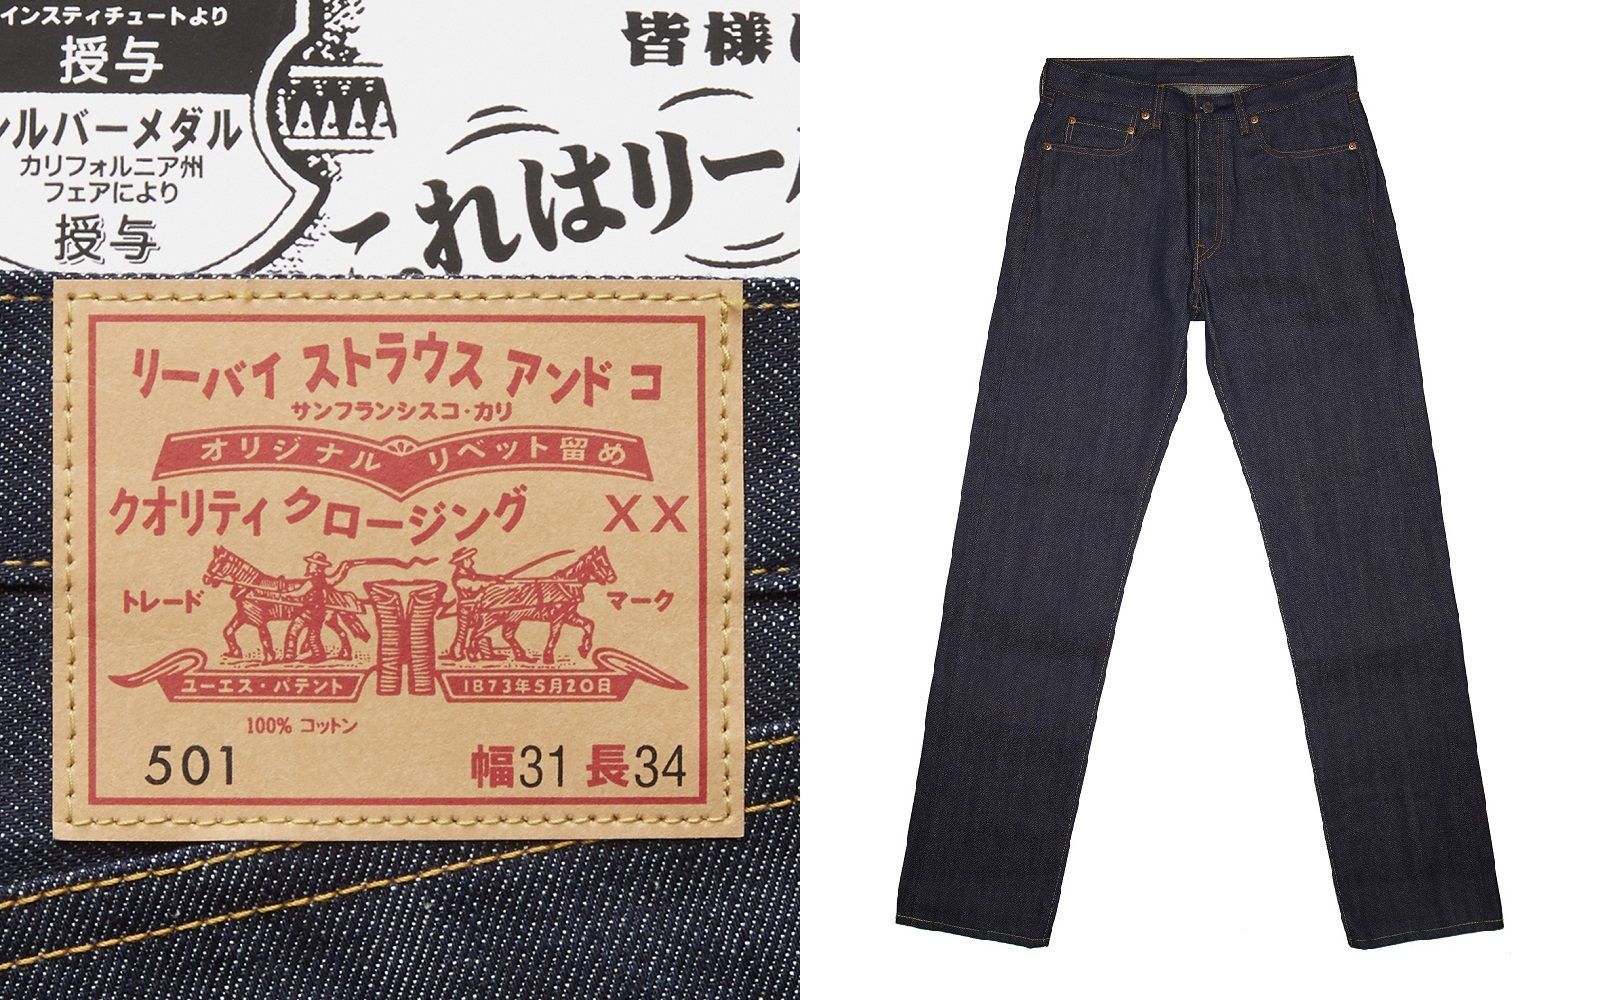 levi's limited edition 501